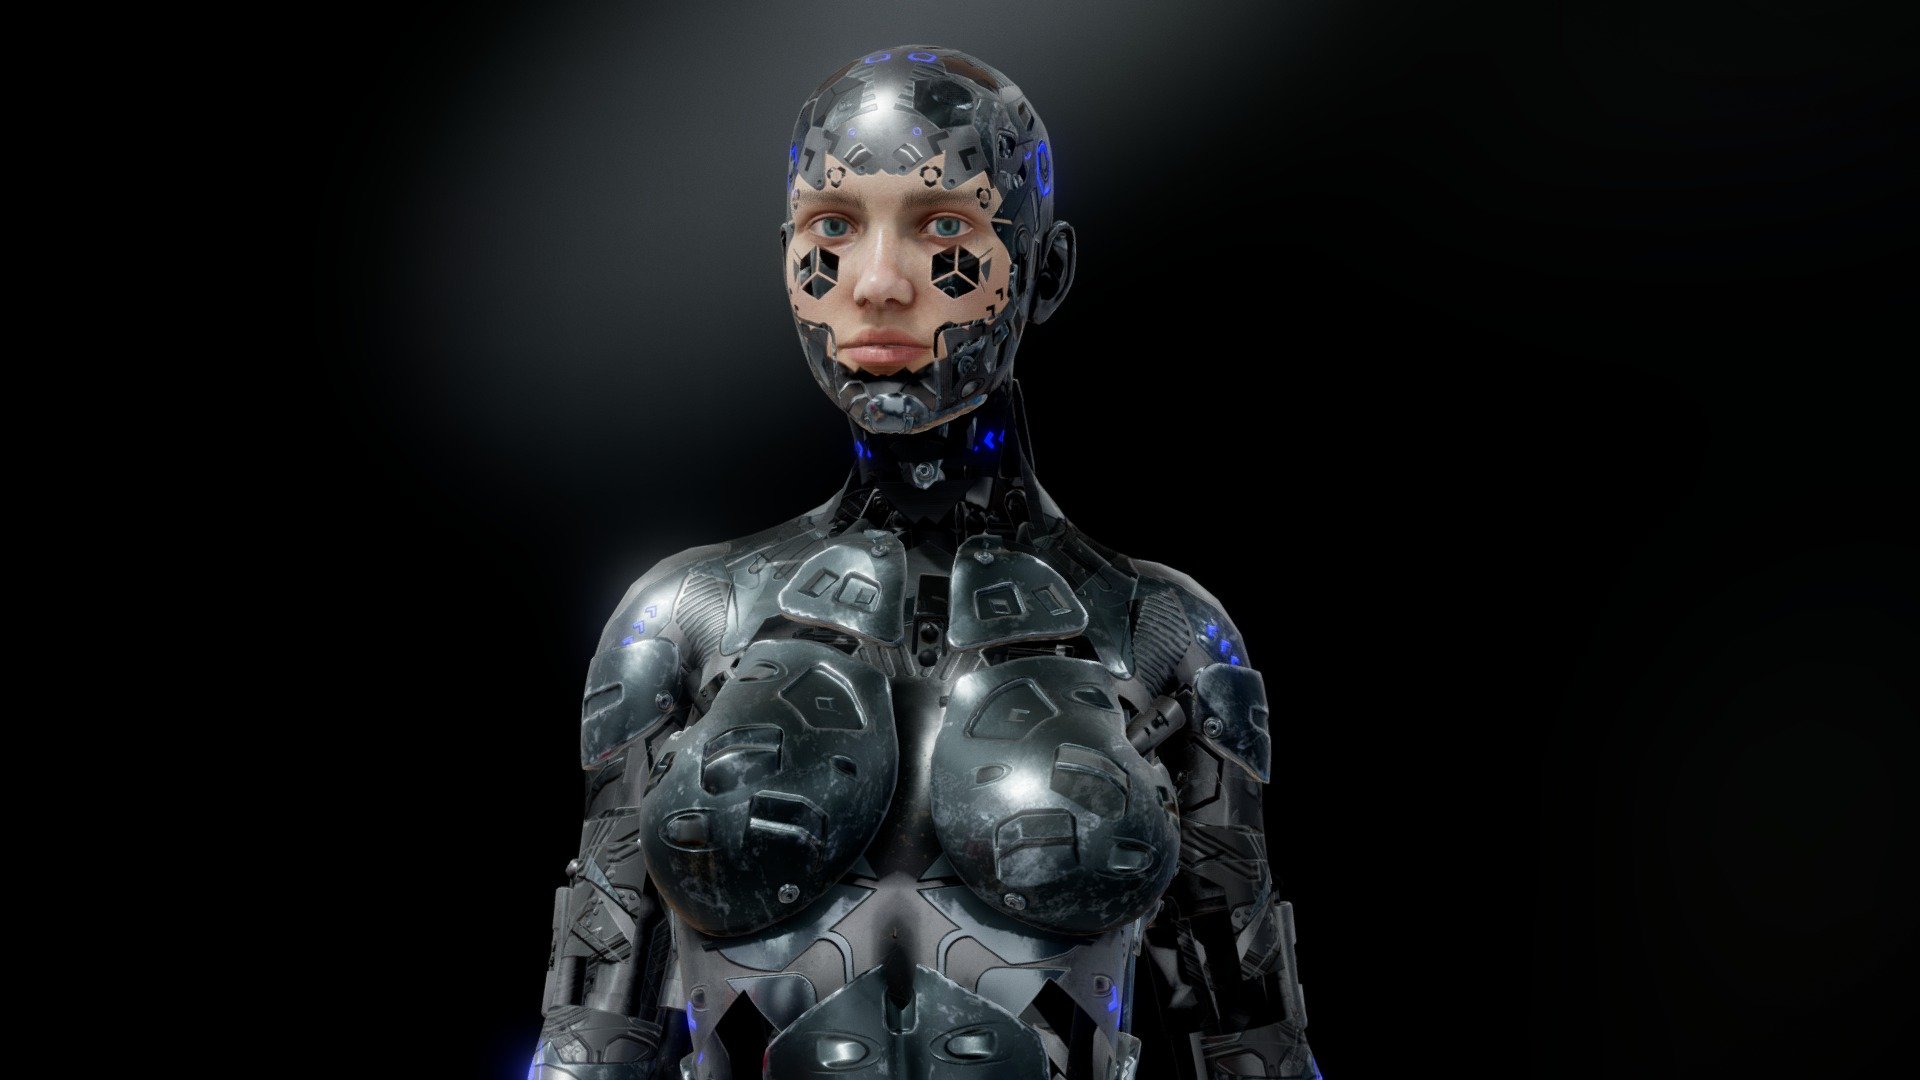 CYBER WOMAN X75, with animation and rigging and pose t - 4K TEXTURES Full proyect: https://www.artstation.com/artwork/29OJEa
Oscar creativo All righs Reserved www.oscarcreativo.co



 - CYBER WOMAN X75 BY OSCAR CREATIVO - Buy Royalty Free 3D model by OSCAR CREATIVO (@oscar_creativo) 3d model